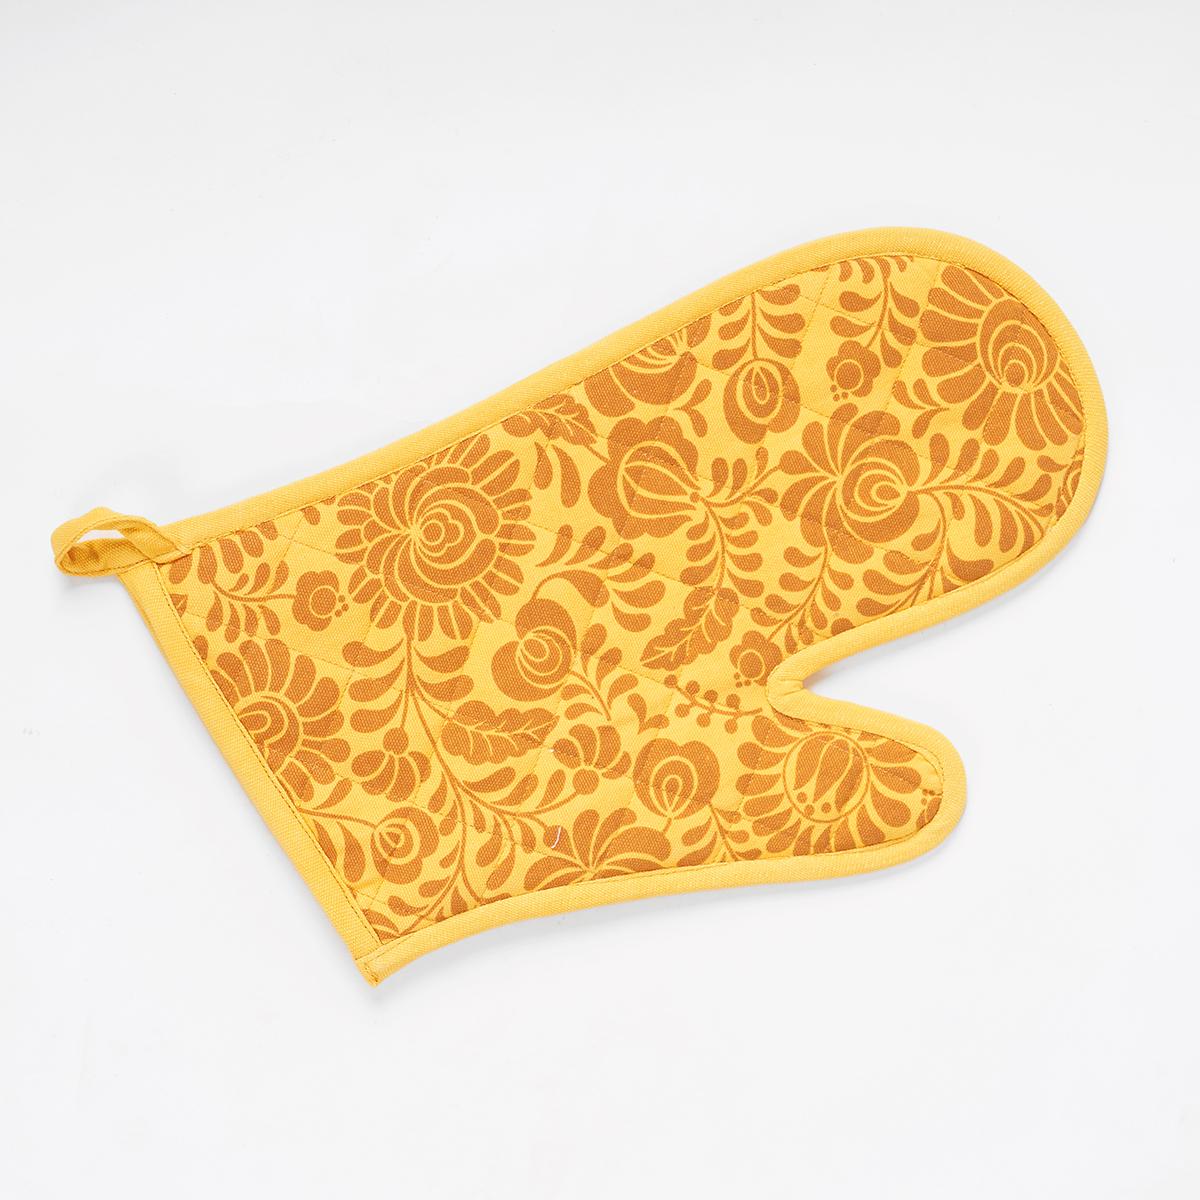 MATYO Yellow floral print Pot holder and Glove, kitchen accessory, 100% cotton, view options